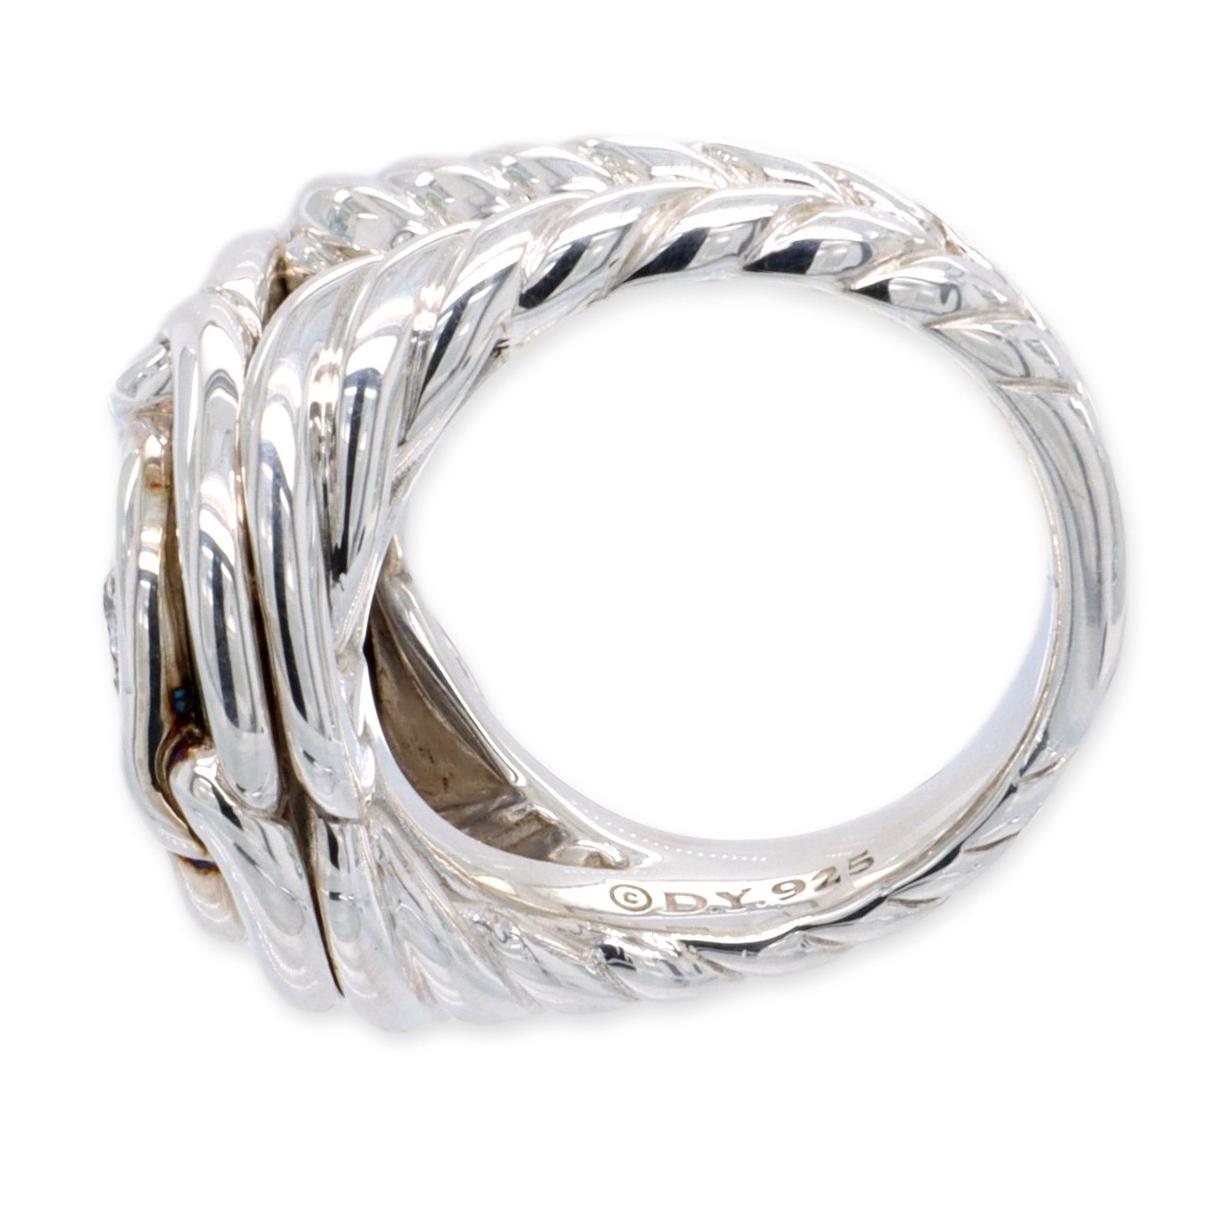 Contemporary David Yurman Labyrinth Sterling Silver 1.00 Ct. Pave Diamond Ring For Sale